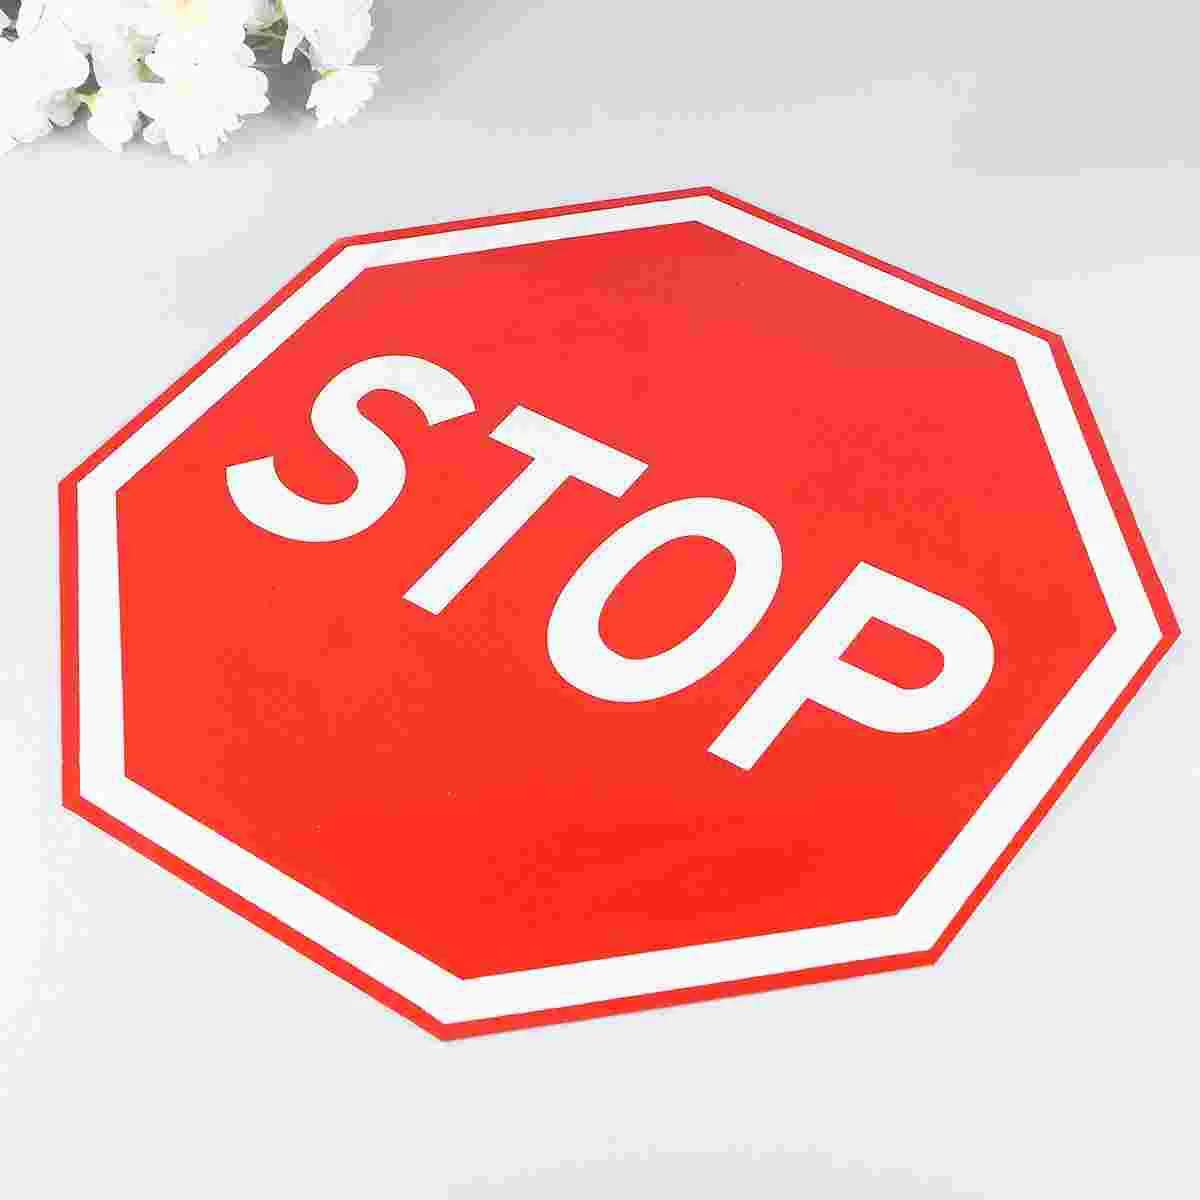 

Stop Traffic Street Safety Sign Alert Attention Warning Notice Road Sign